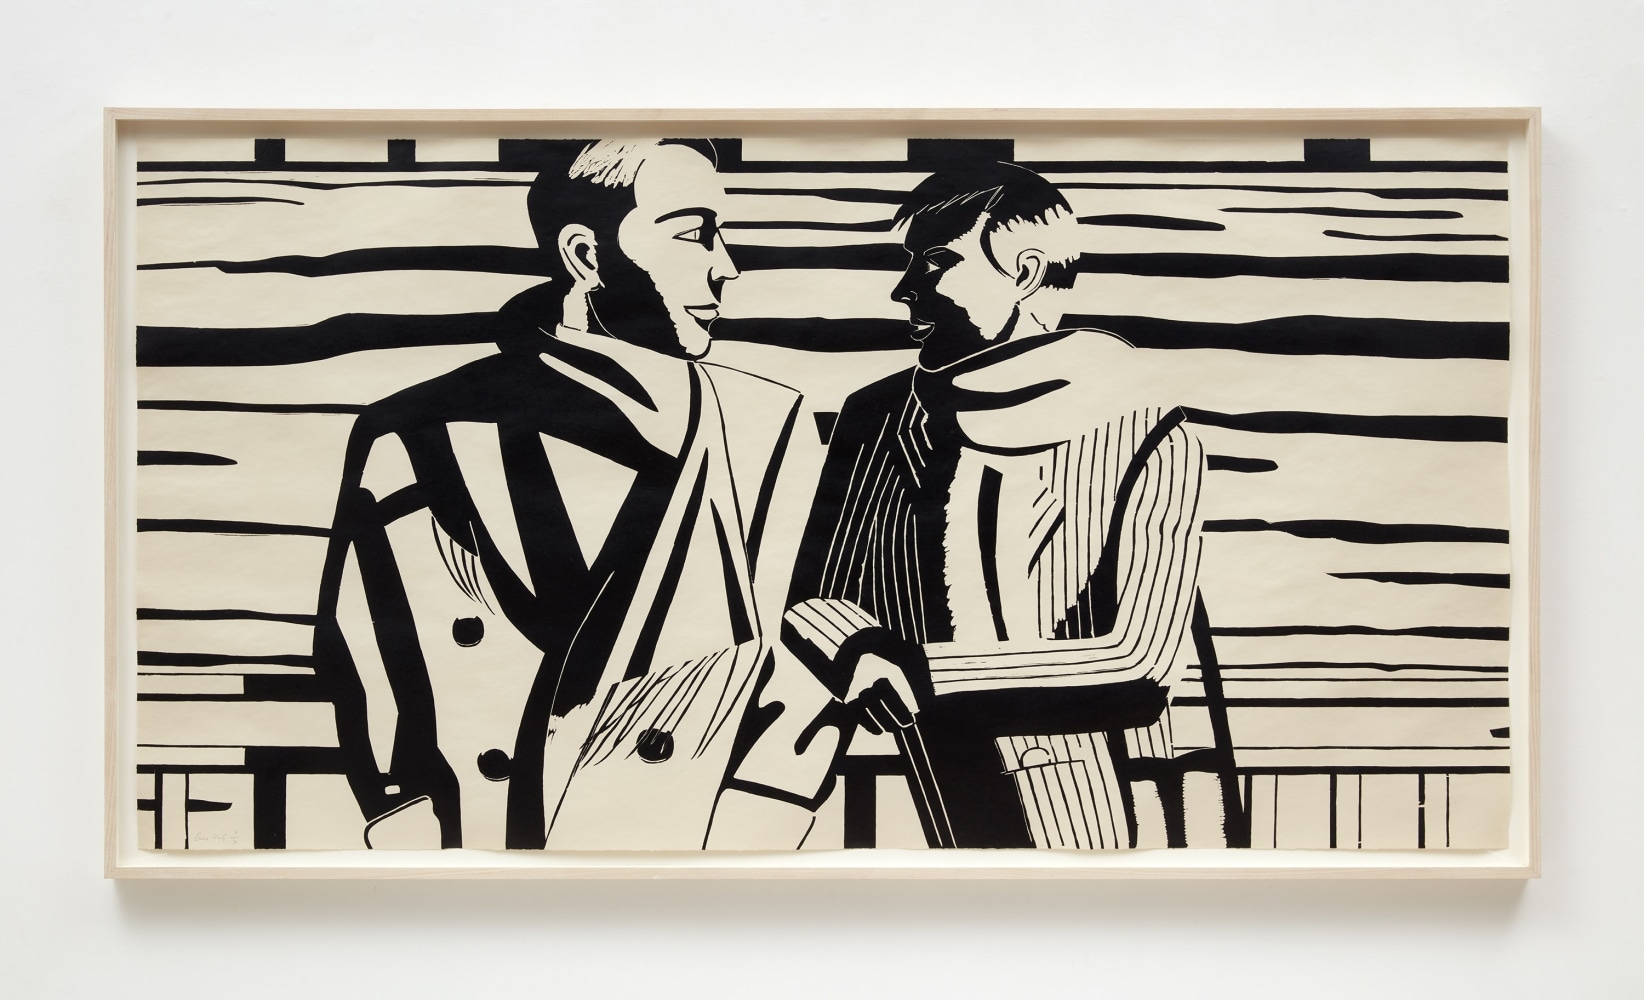 Alex Katz
3 PM, 1988
Woodcut on Dove Grey Archivart paper
36 3/4 x 72 inches (93.4 x 182.9 cm)
Edition of 50 + proofs
Printed by John C. Erickson, New York
Published by Peter Blum Edition, New York